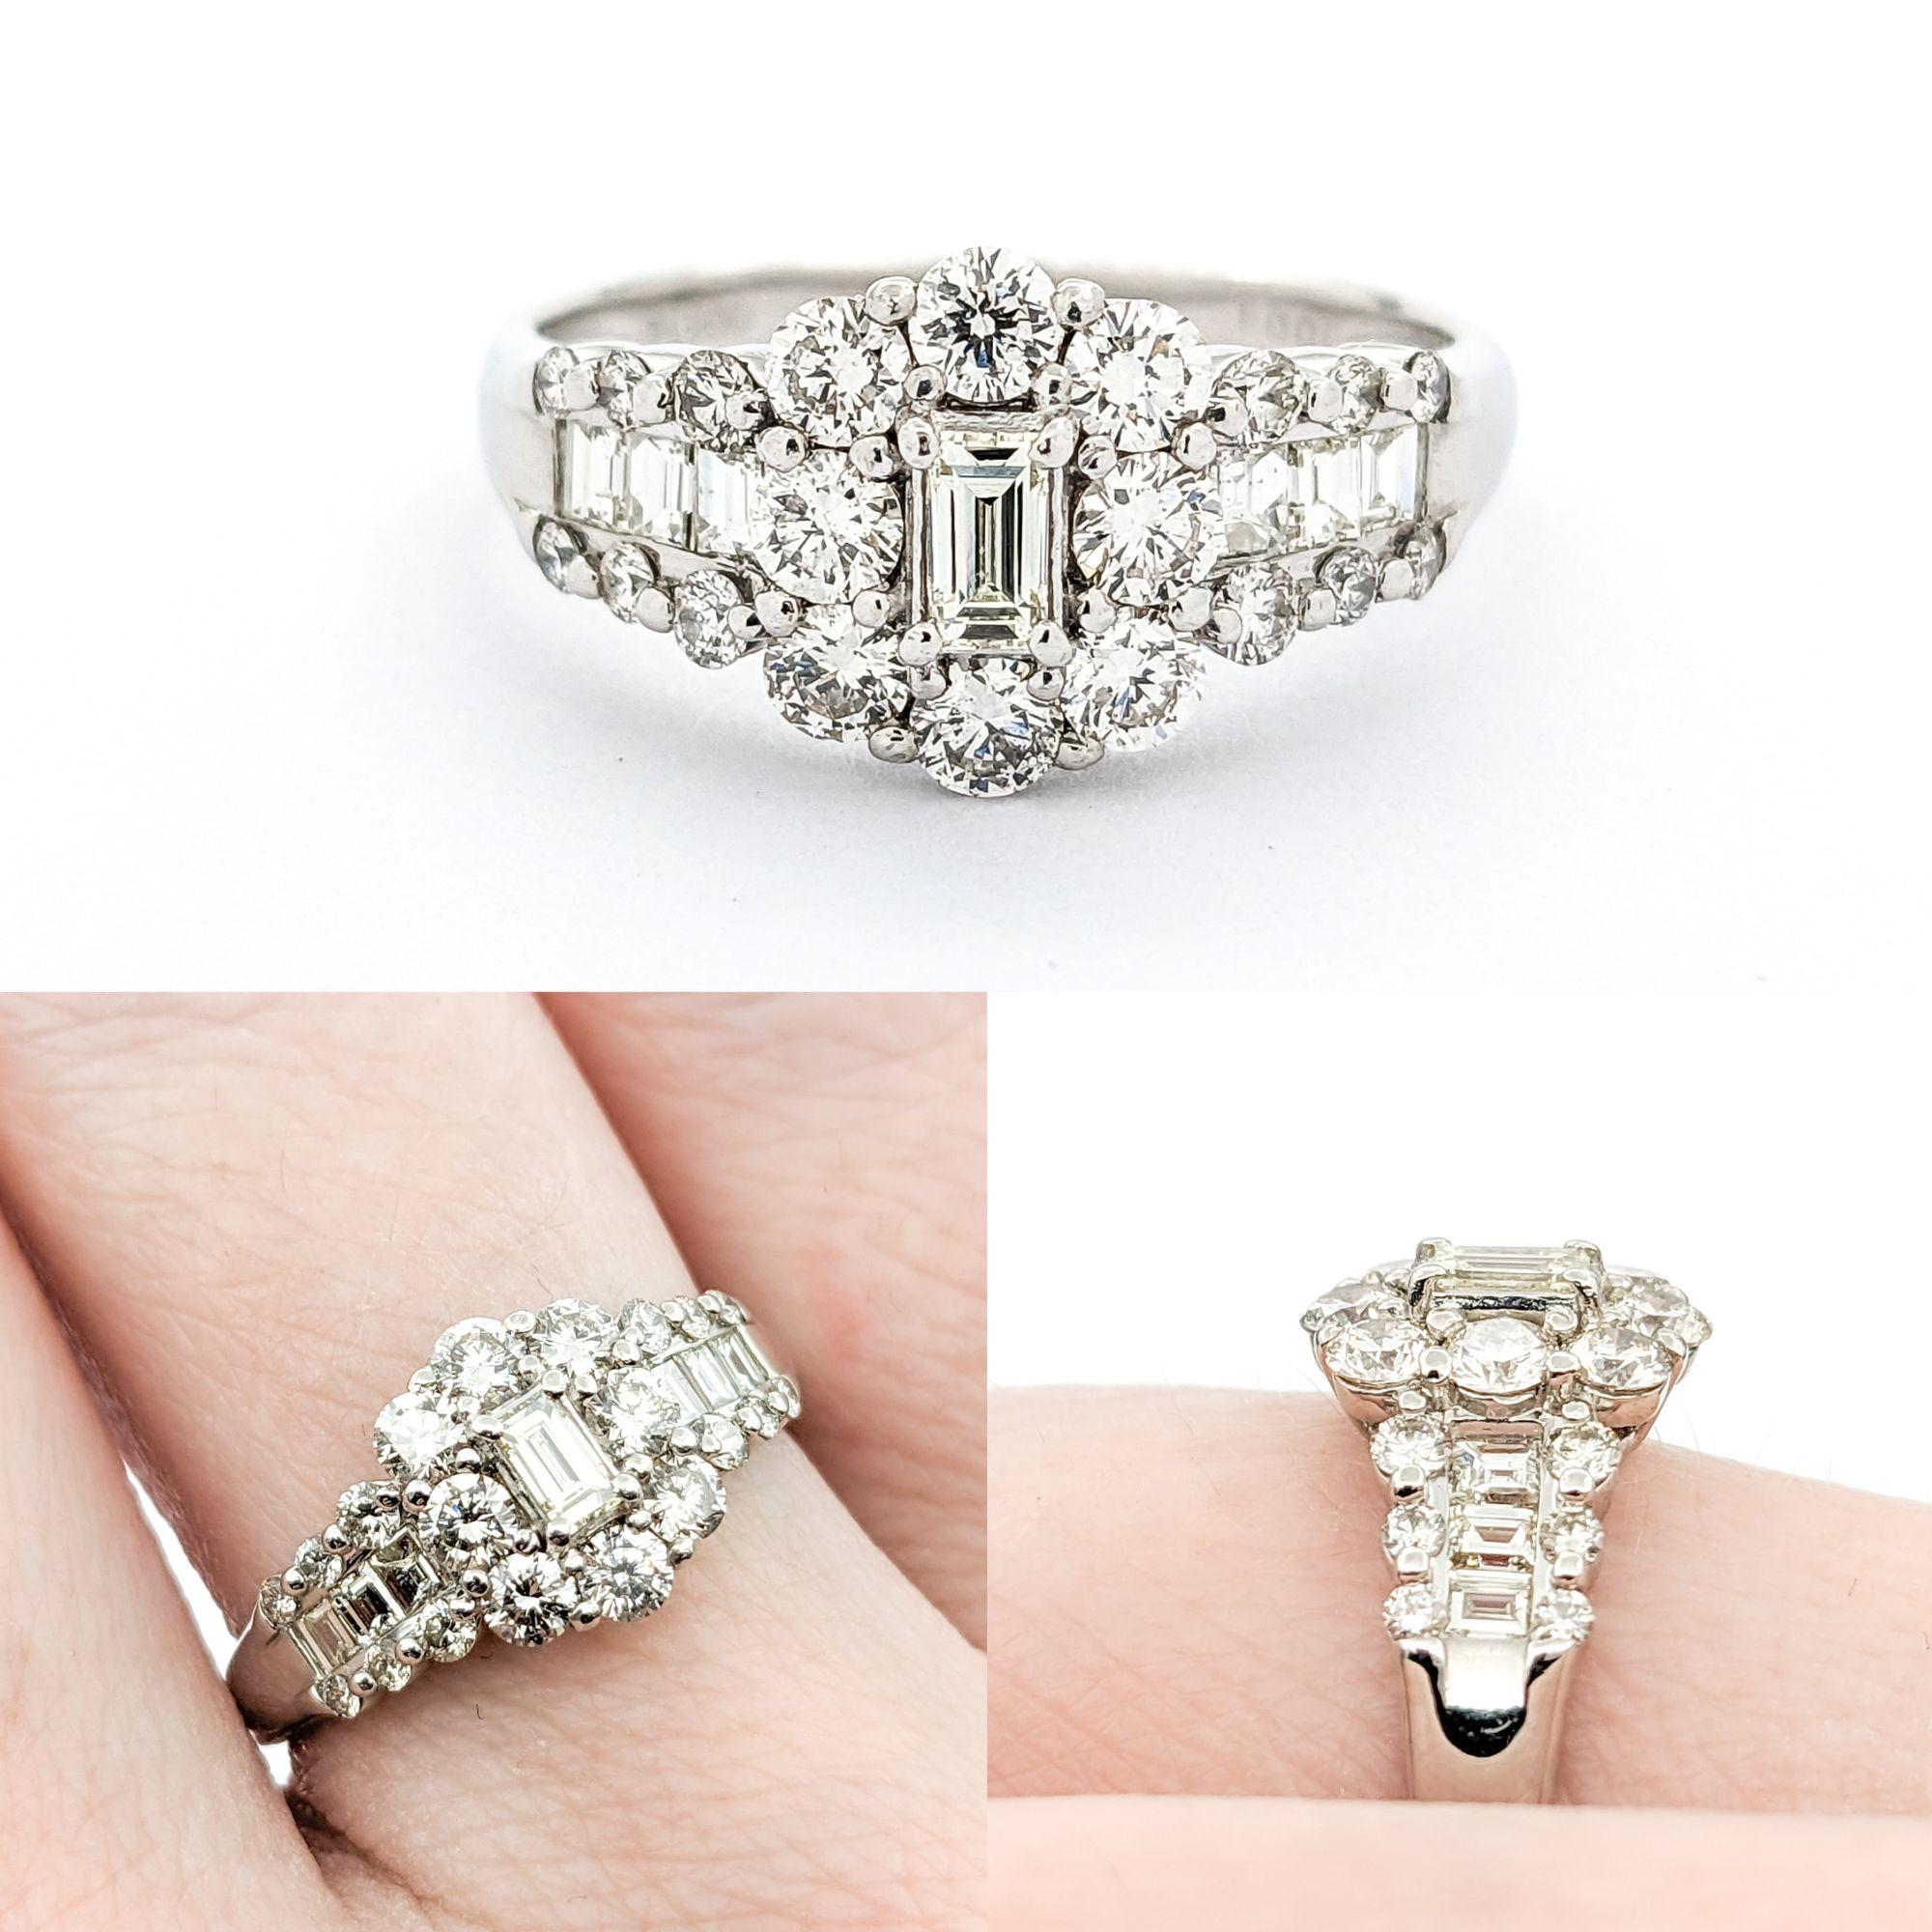 1ctw Cluster Diamond Ring In Platinum

This stunning diamond fashion ring is meticulously crafted in 900pt platinum, featuring an exquisite cluster of diamonds totaling 1.00ctw. These diamonds are of SI-I clarity, showcasing a near colorless white